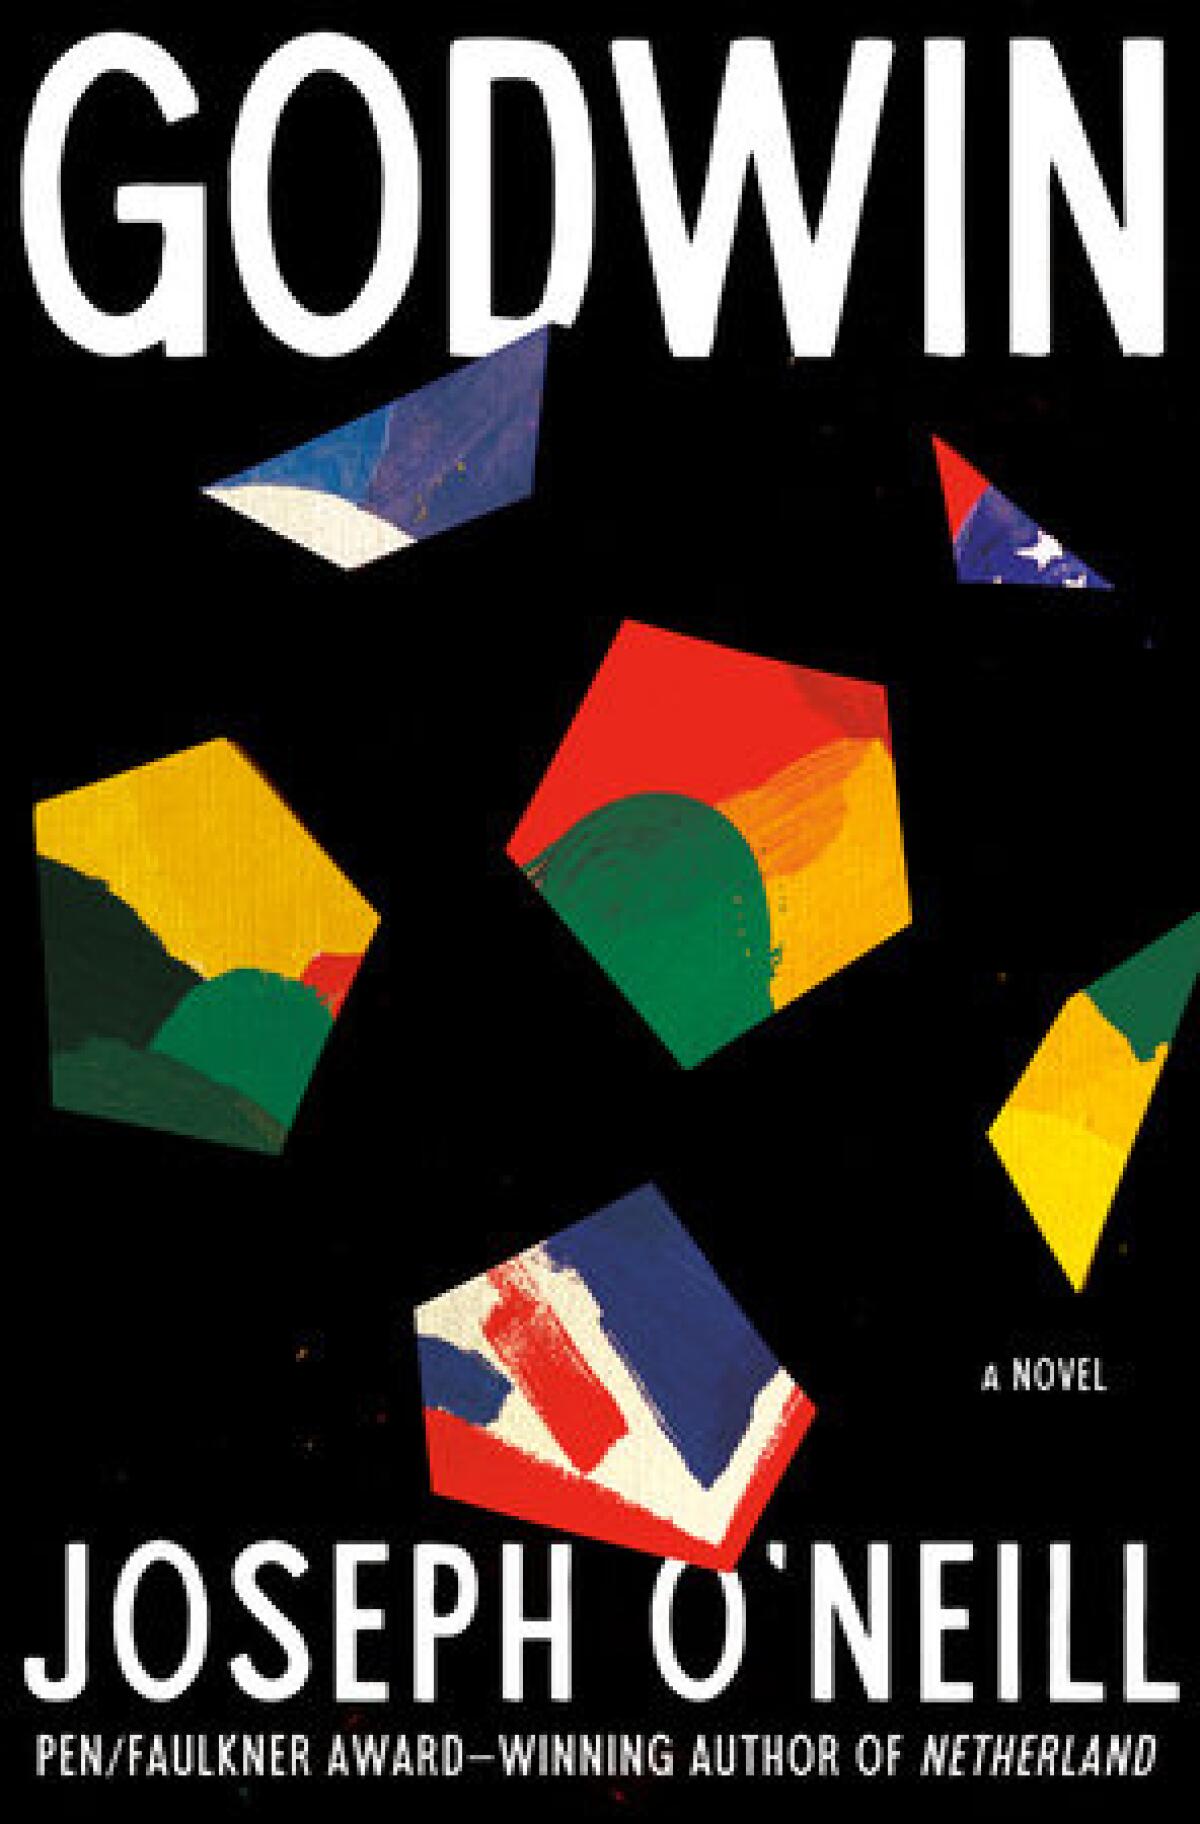 The cover of "Godwin"